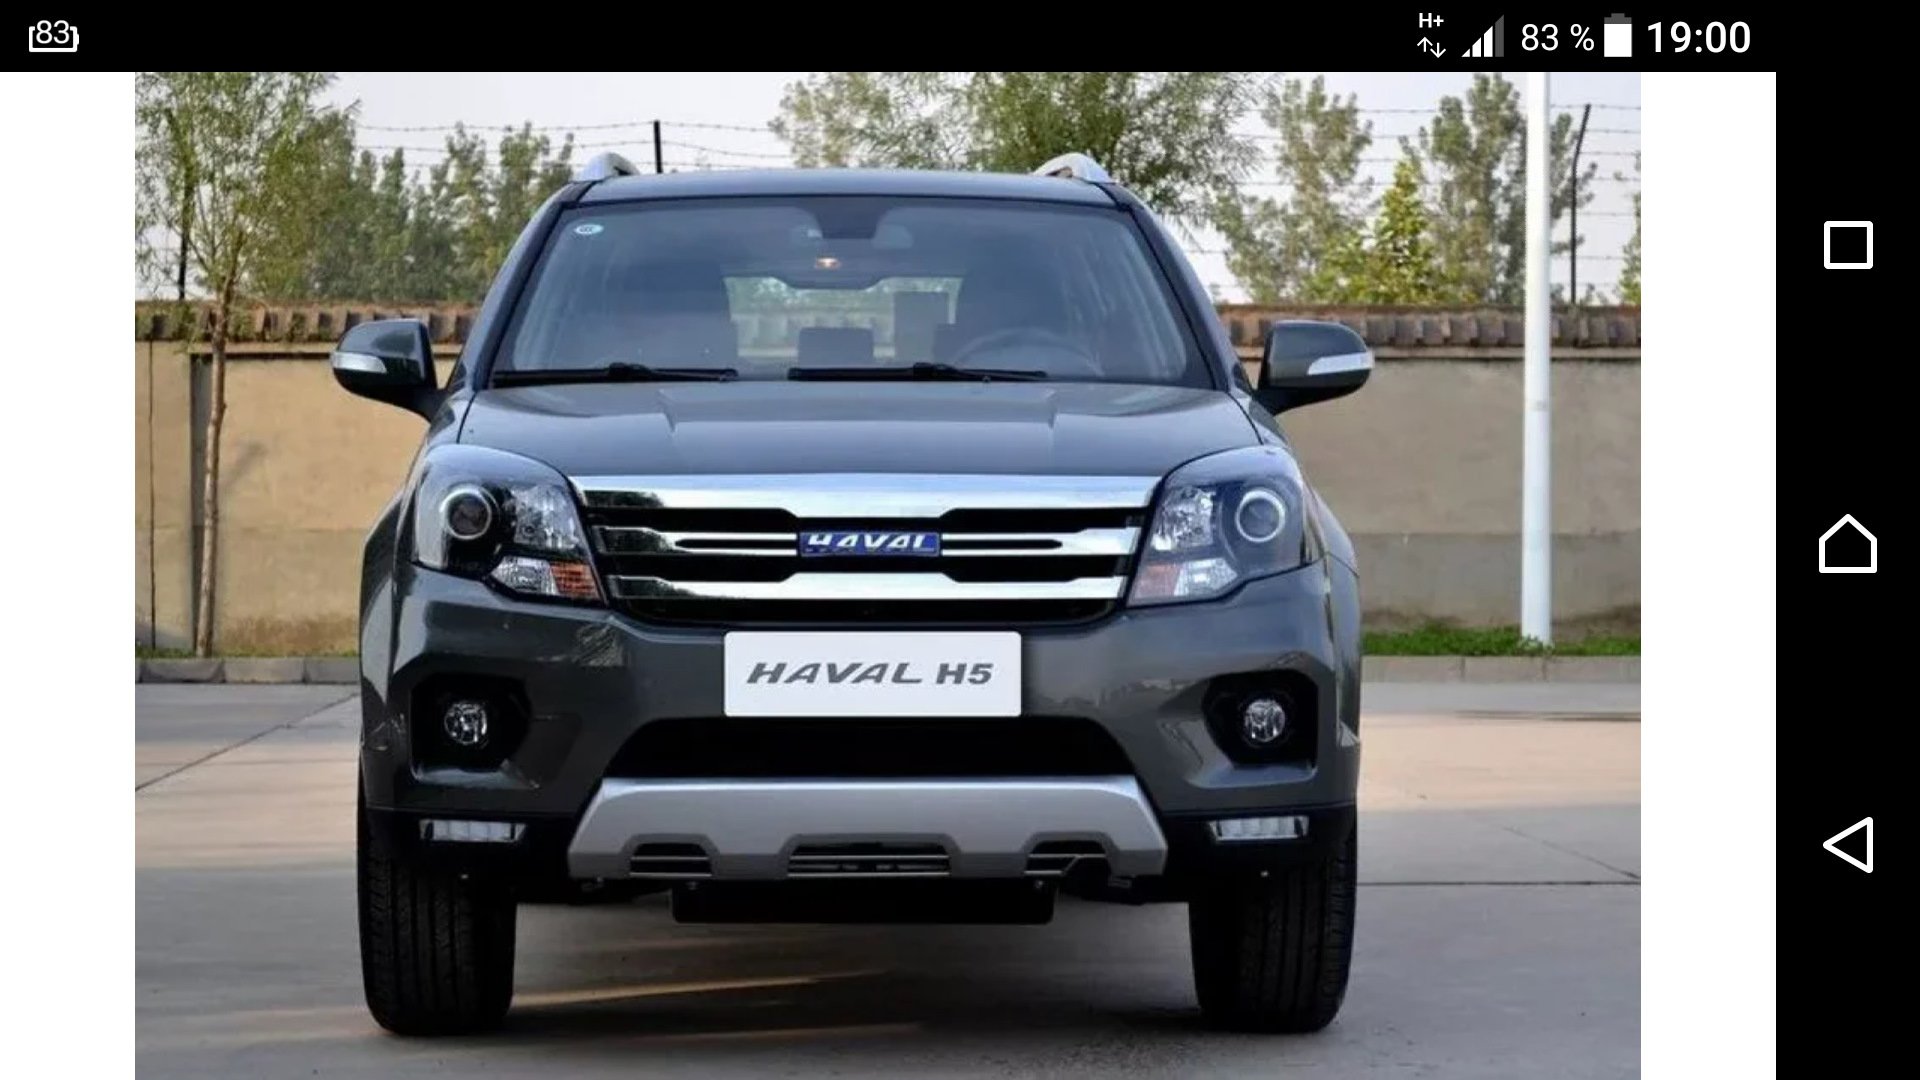 Haval hover. Haval Hover h5. Great Wall Haval h5. Great Wall Hover h5, Haval h5. Haval h5 2020.